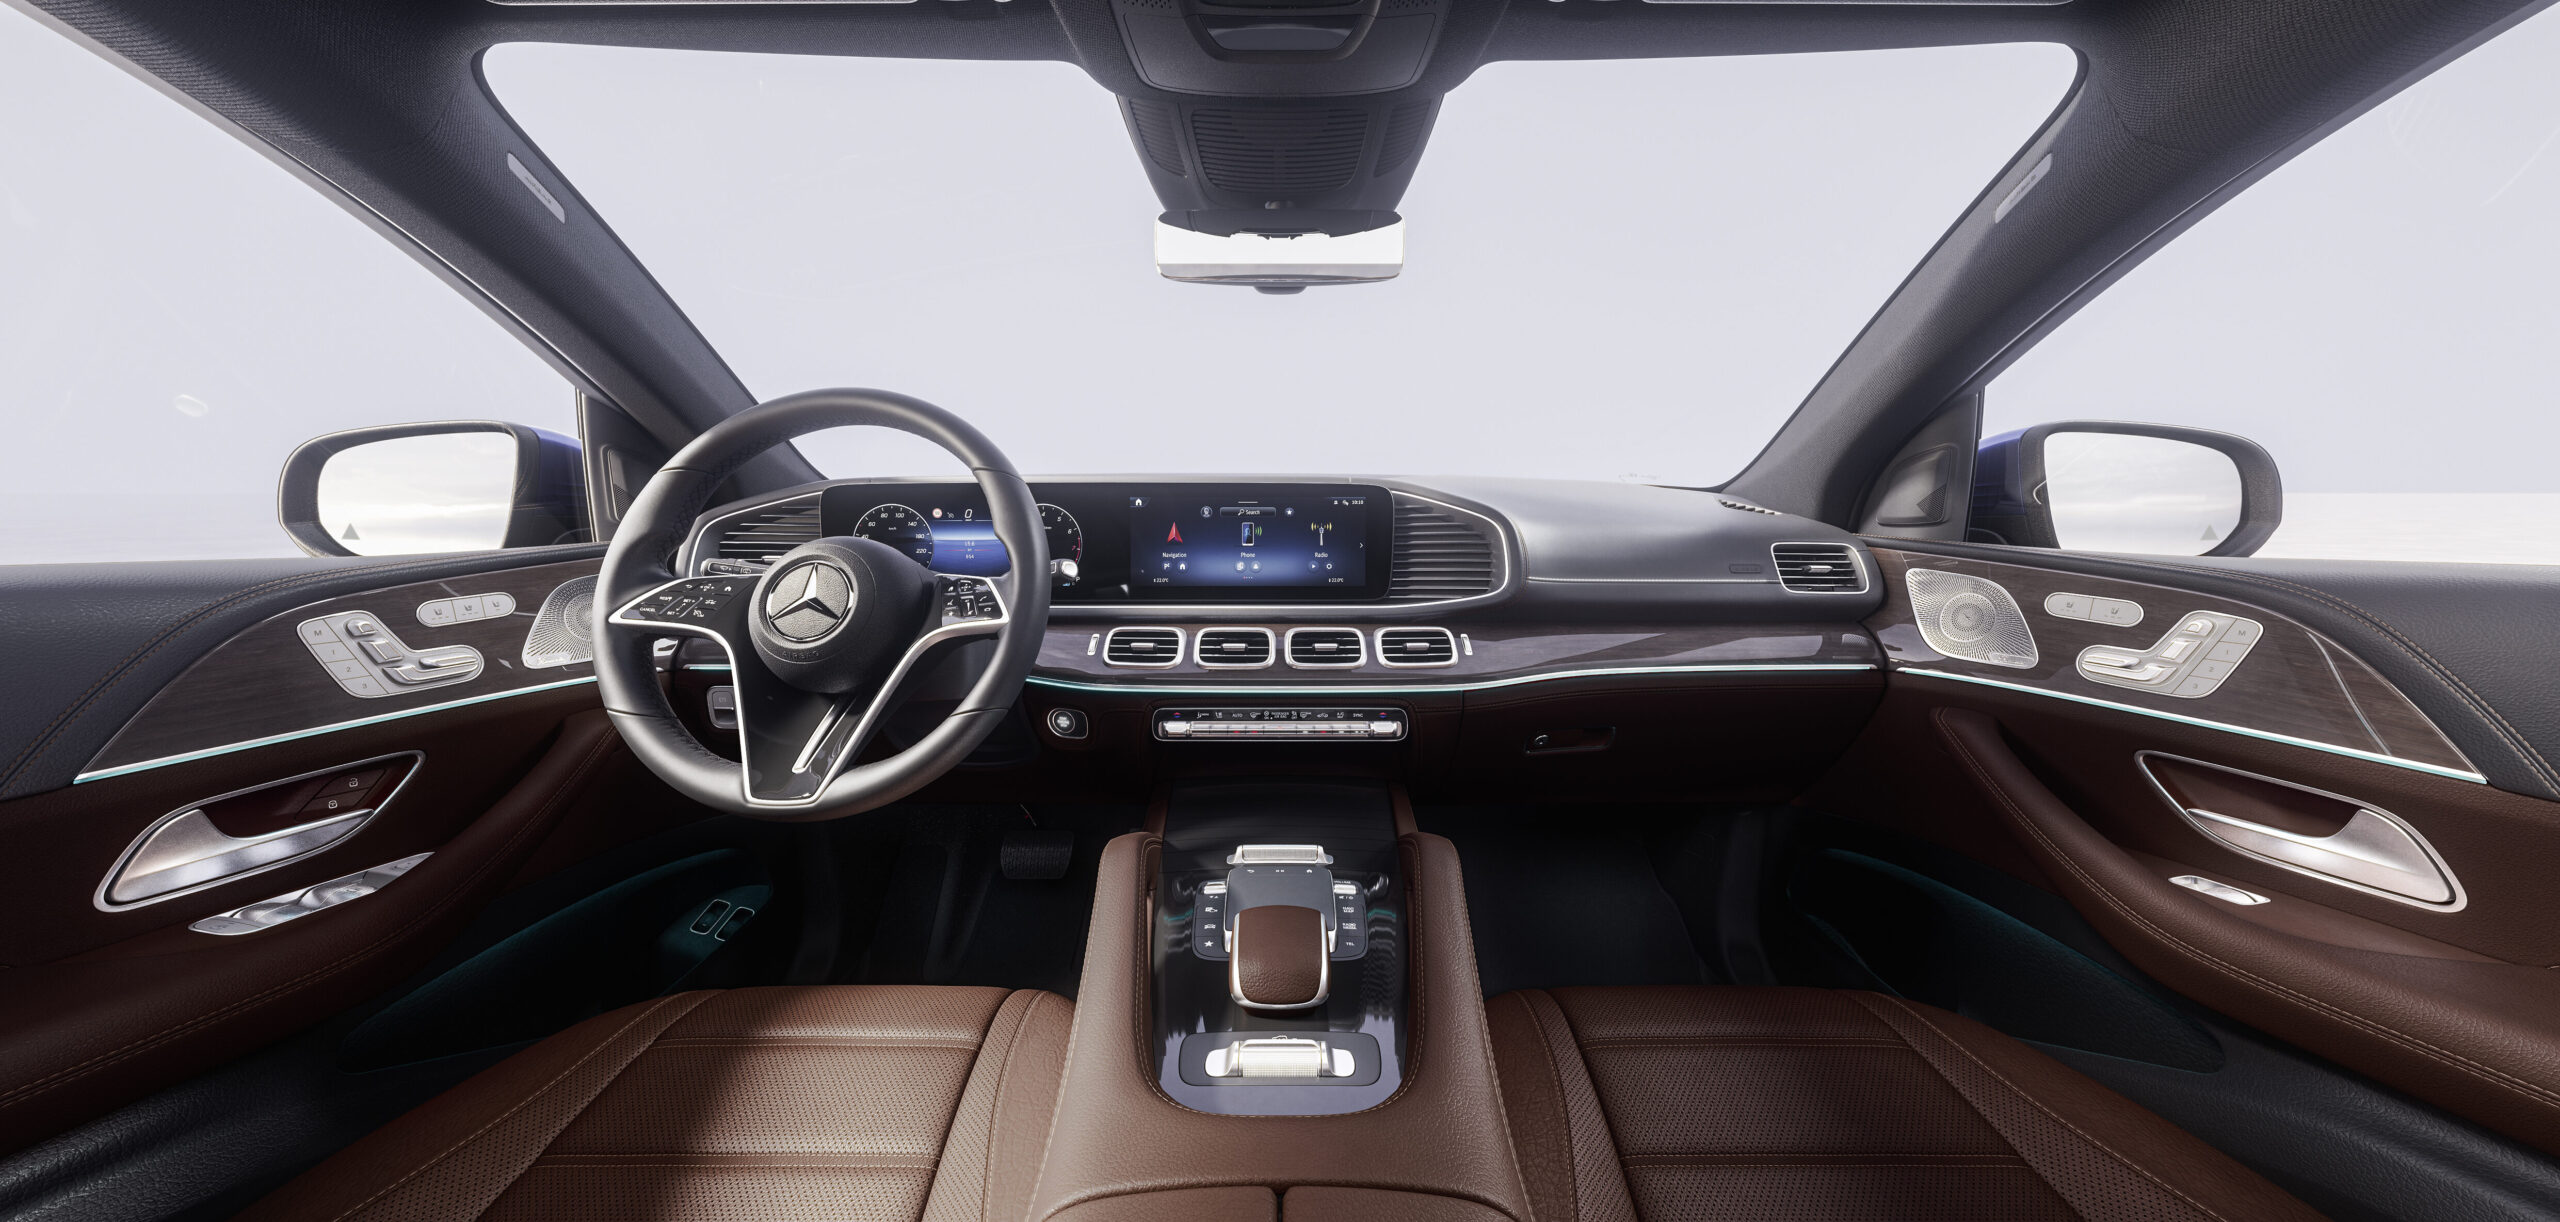 Updated cabin components for latest MercedesBenz GLE and GLE Coupé